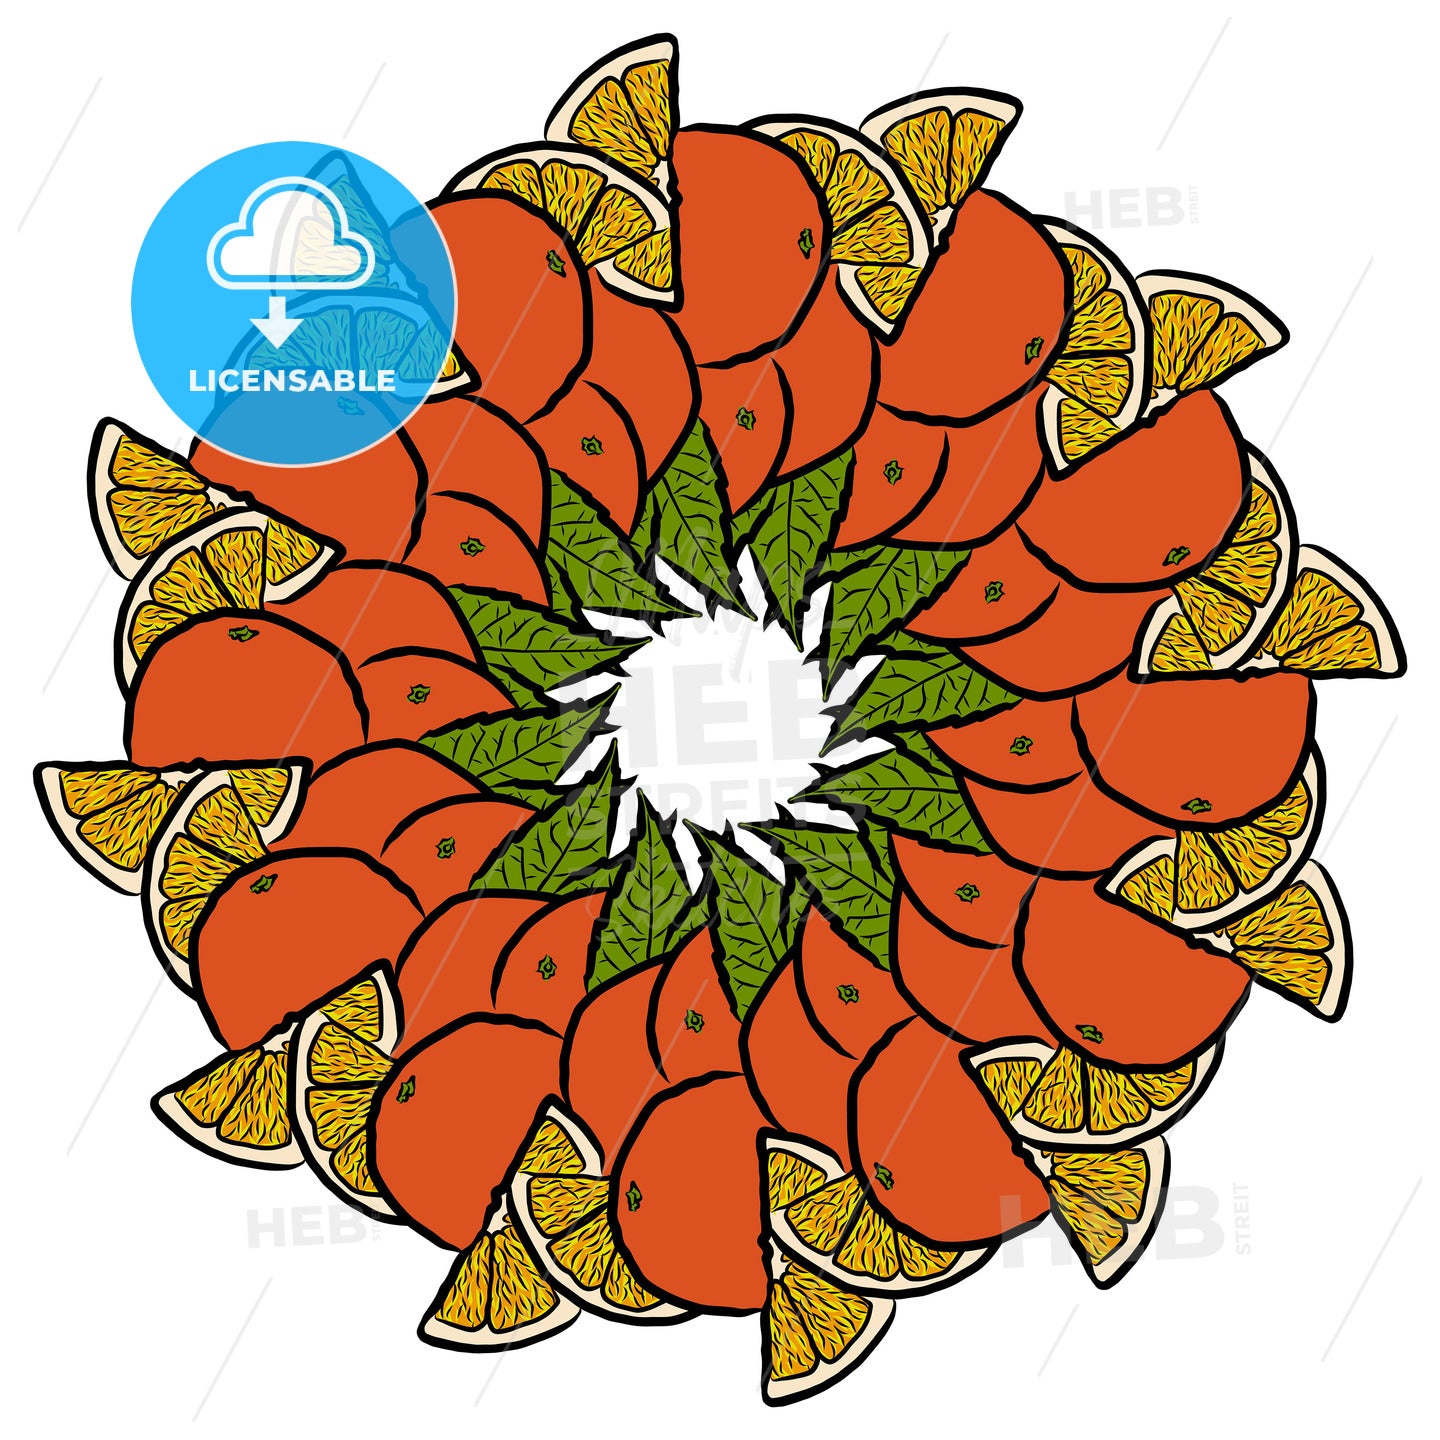 Many oranges arranged in a circle on white – instant download